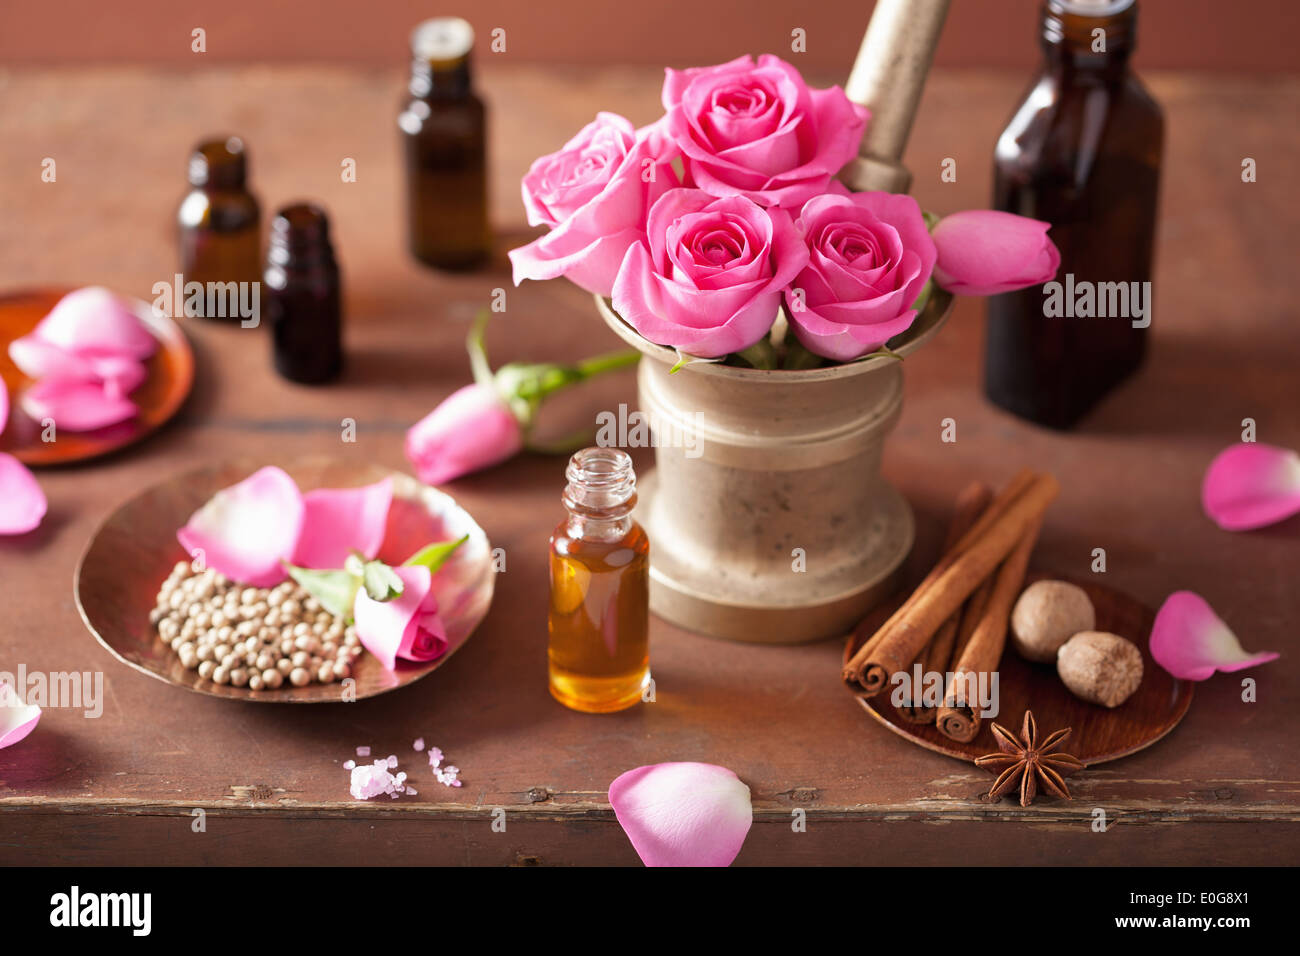 spa and aromatherapy set with rose flowers mortar and spices Stock Photo